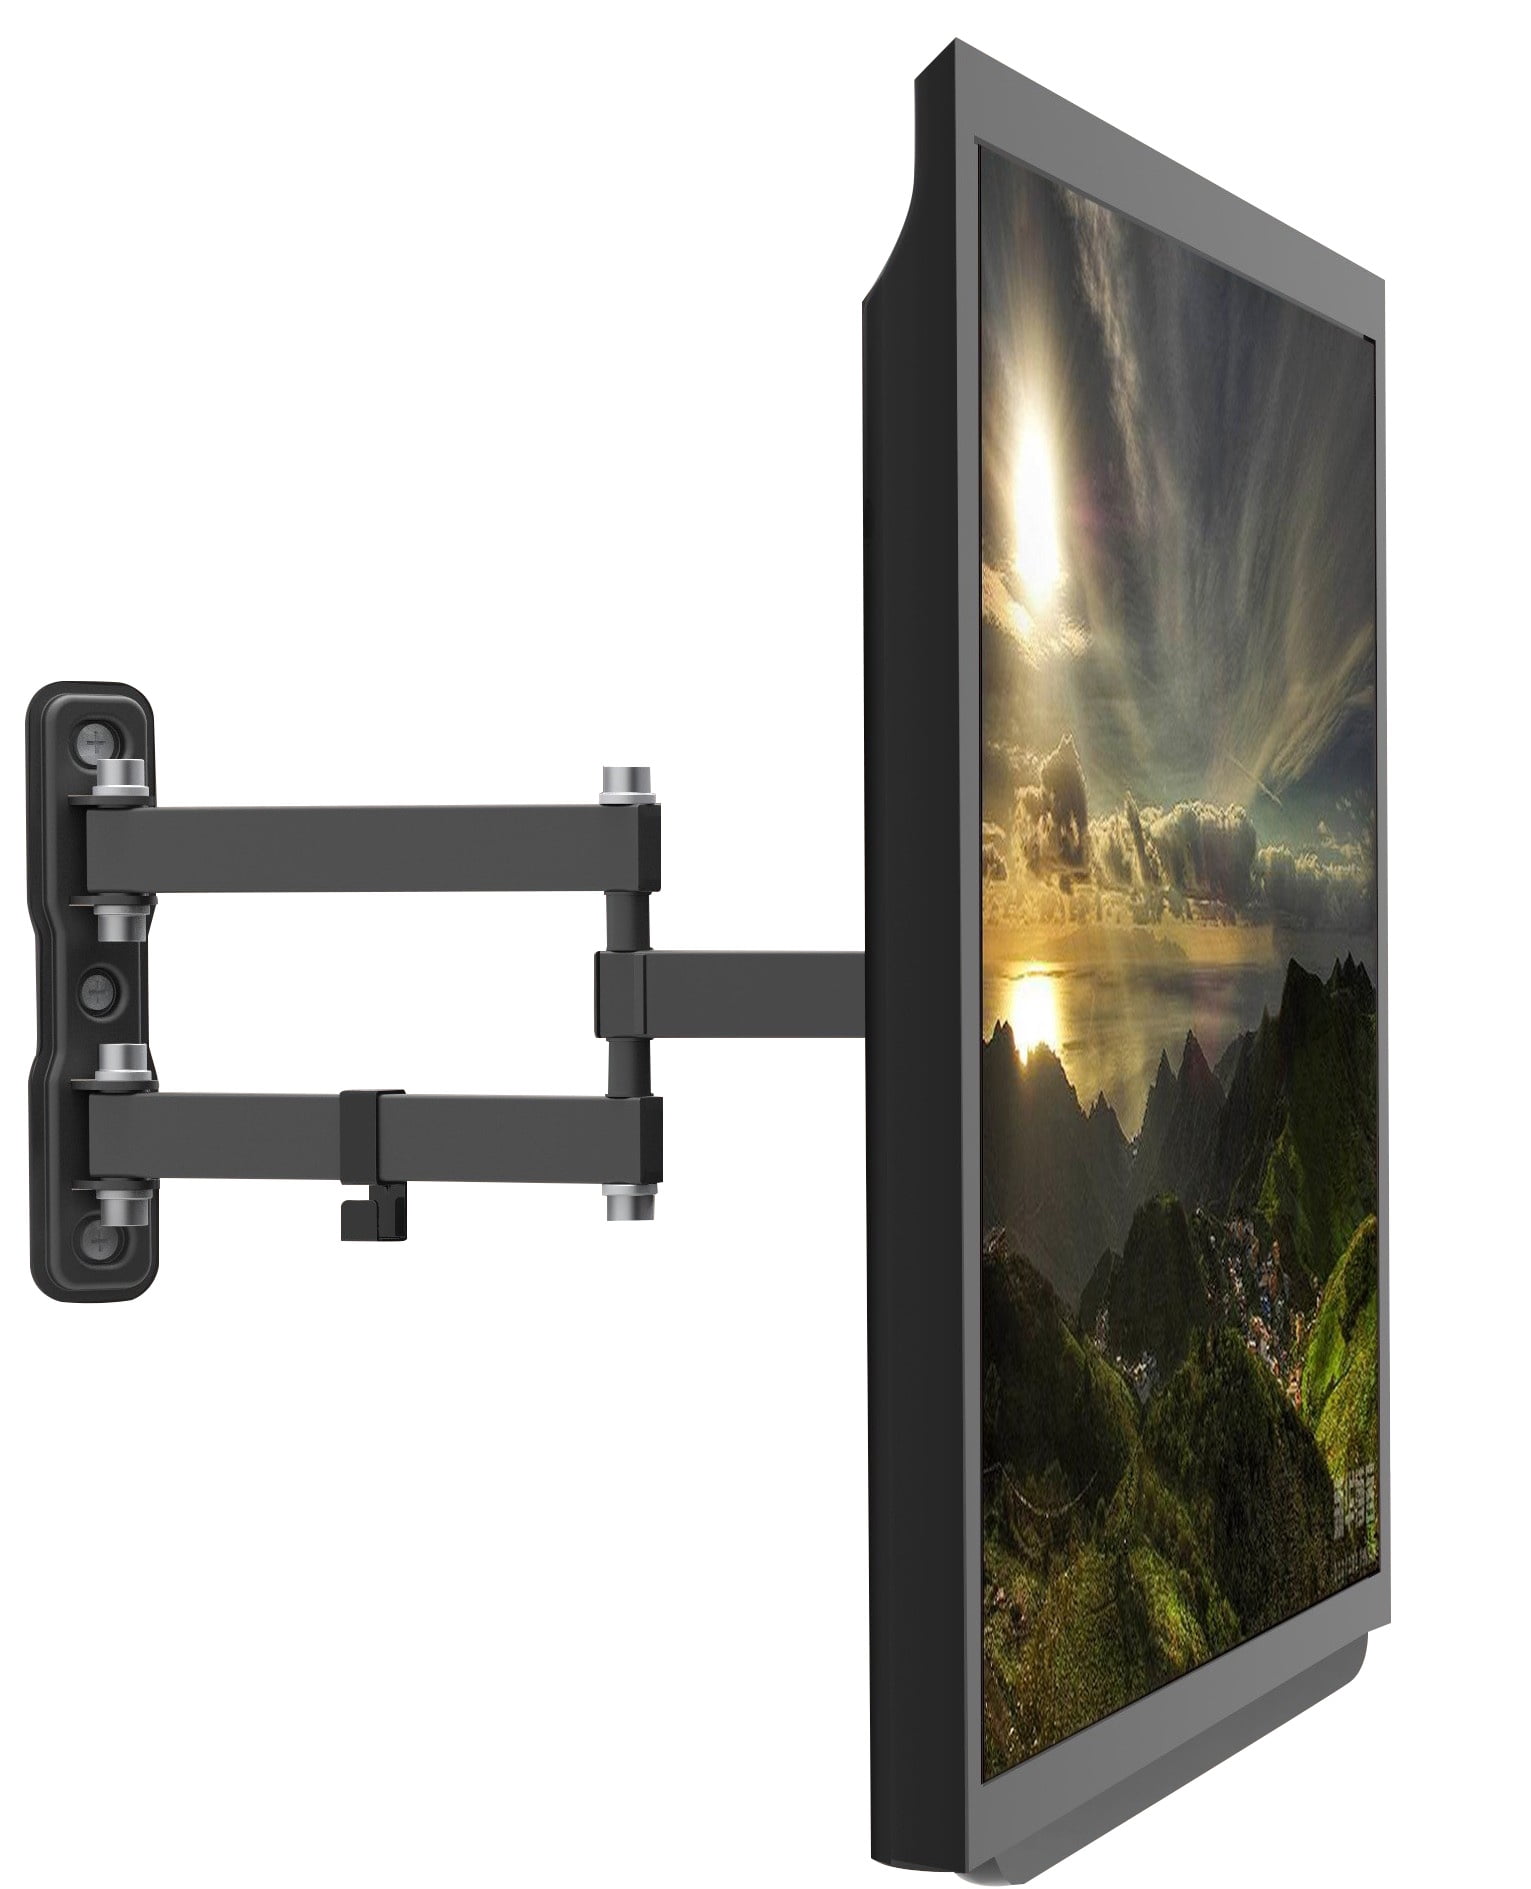 Single Stud Install FOZIMOA Full Motion TV Wall Mount Bracket for 28-70 inch Flat Curved TVs with Tilt and Swivel Articulating Arms up to 110 lbs and VESA 600x400mm 